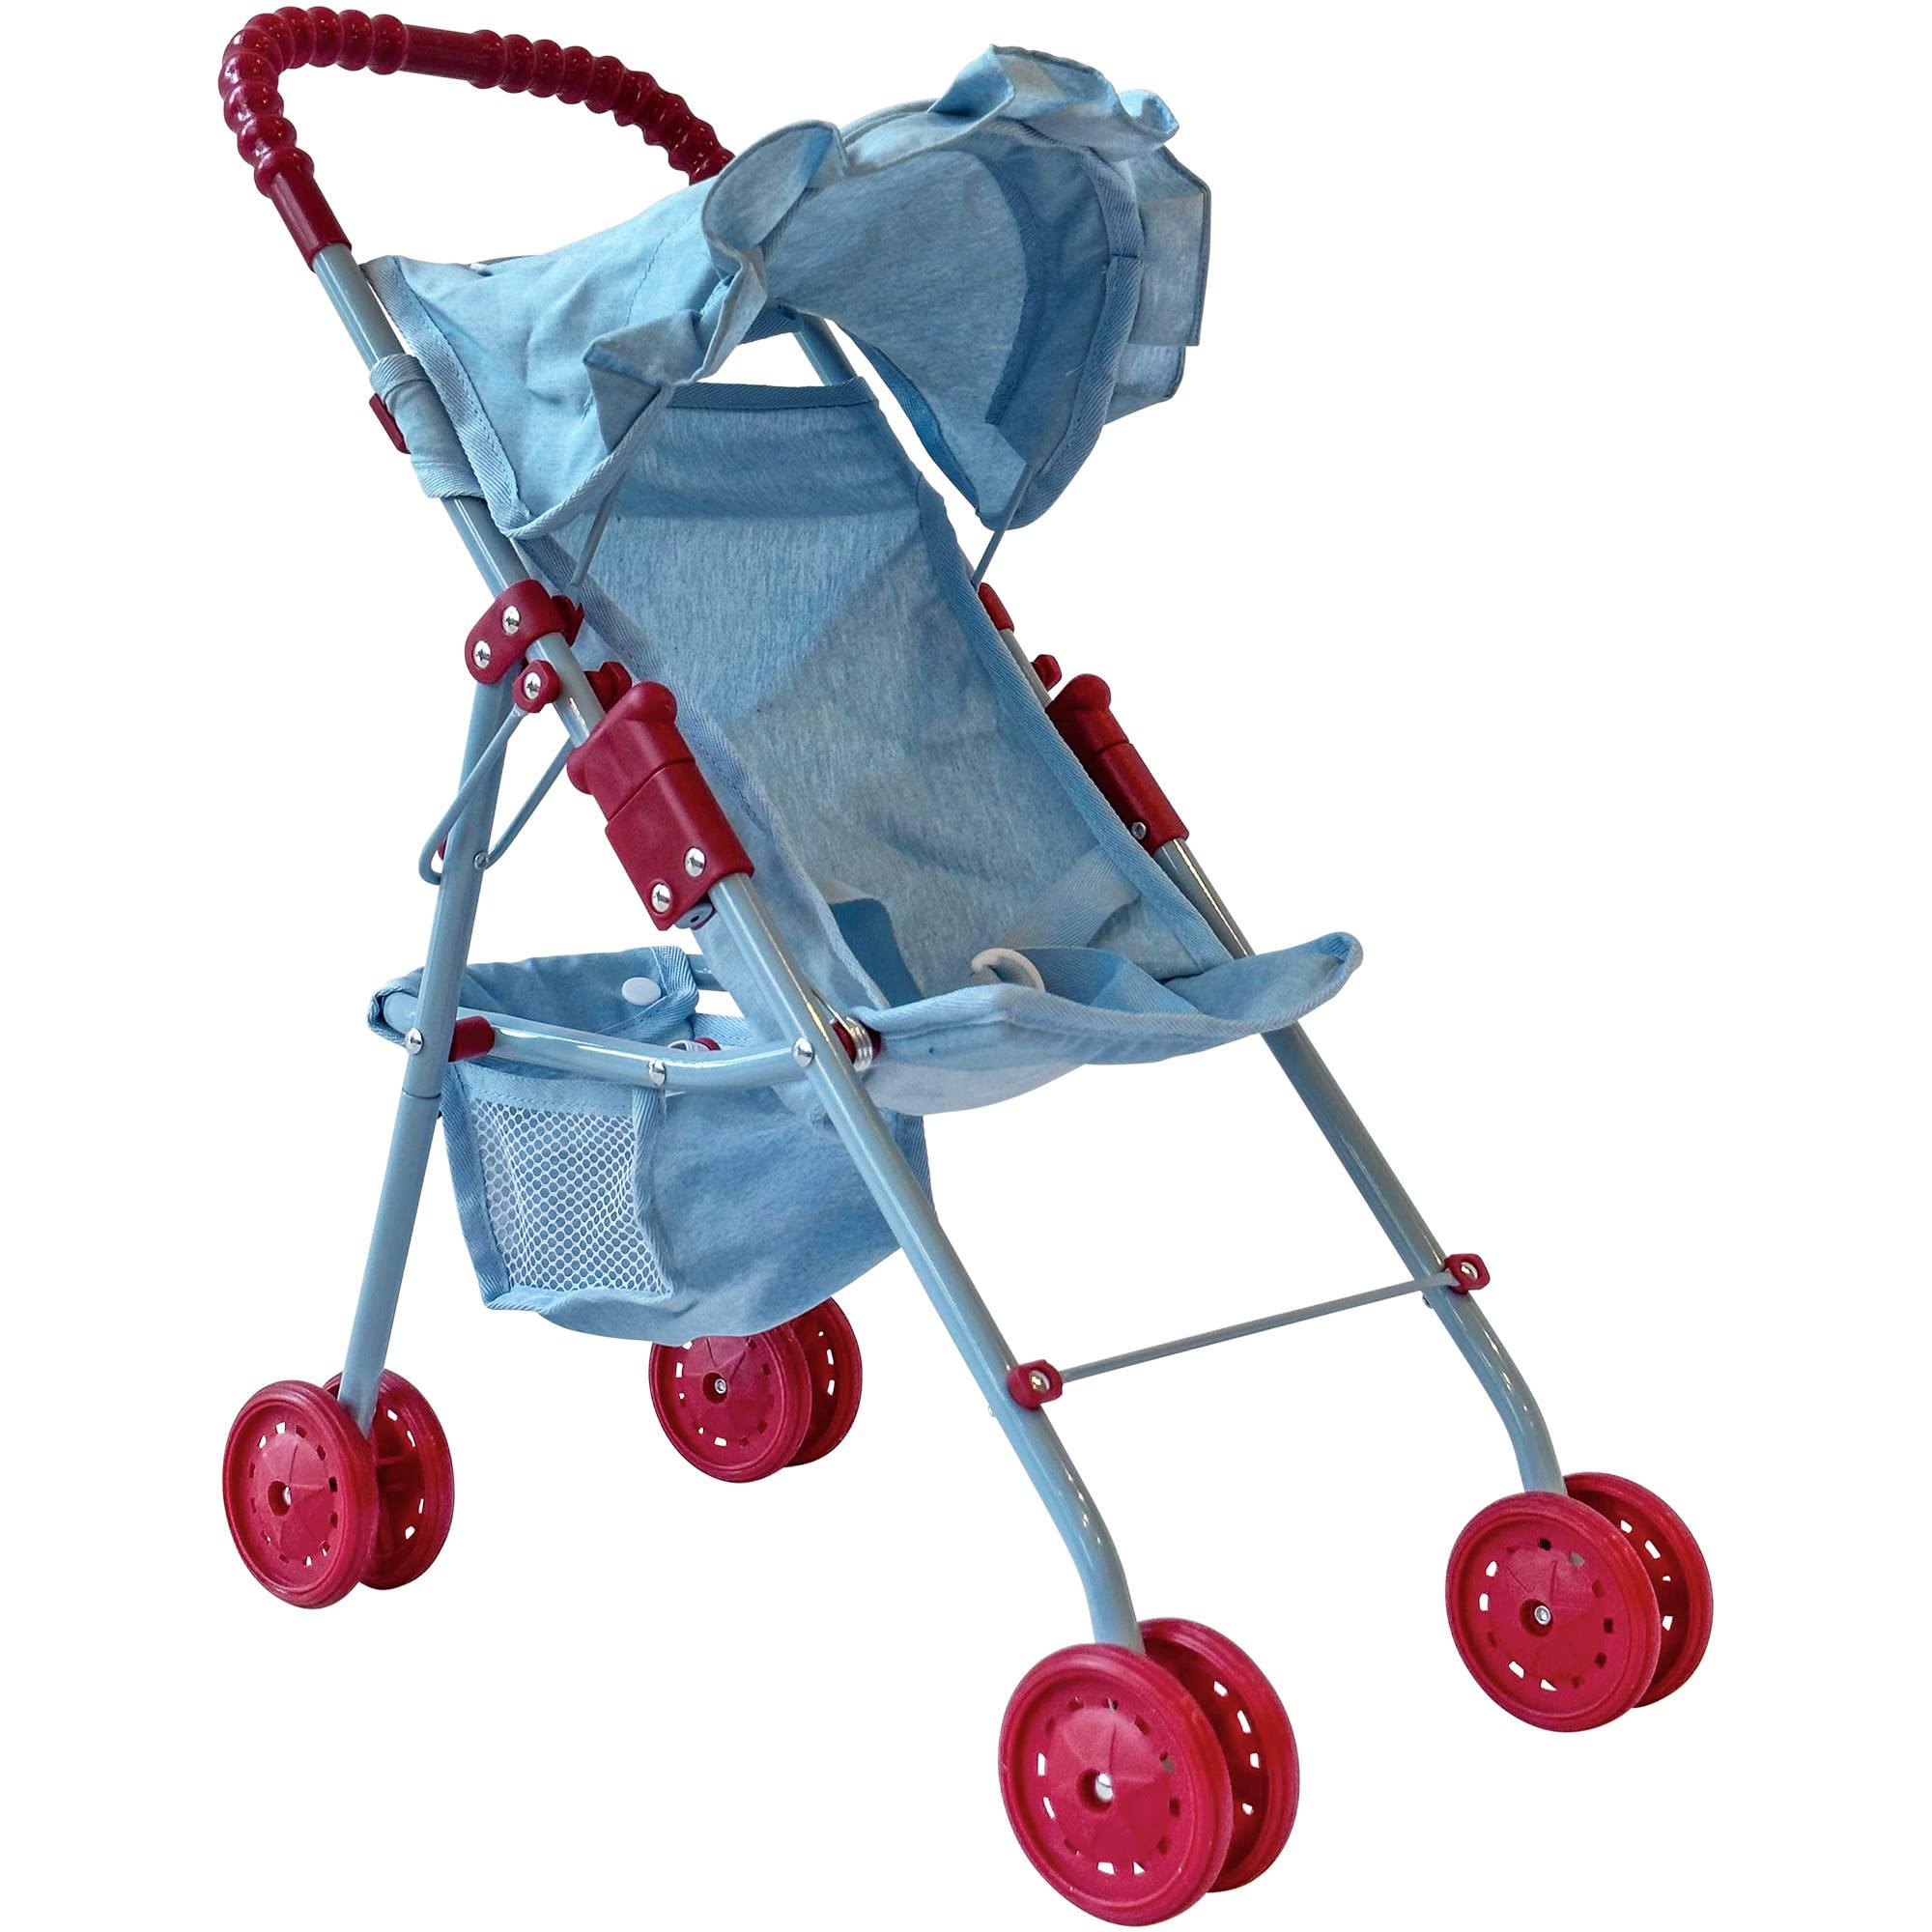 The New York Doll Collection my first baby doll stroller for toddlers 3 year old girls, little kids | folding baby stroller for dolls, toy stroller for ba